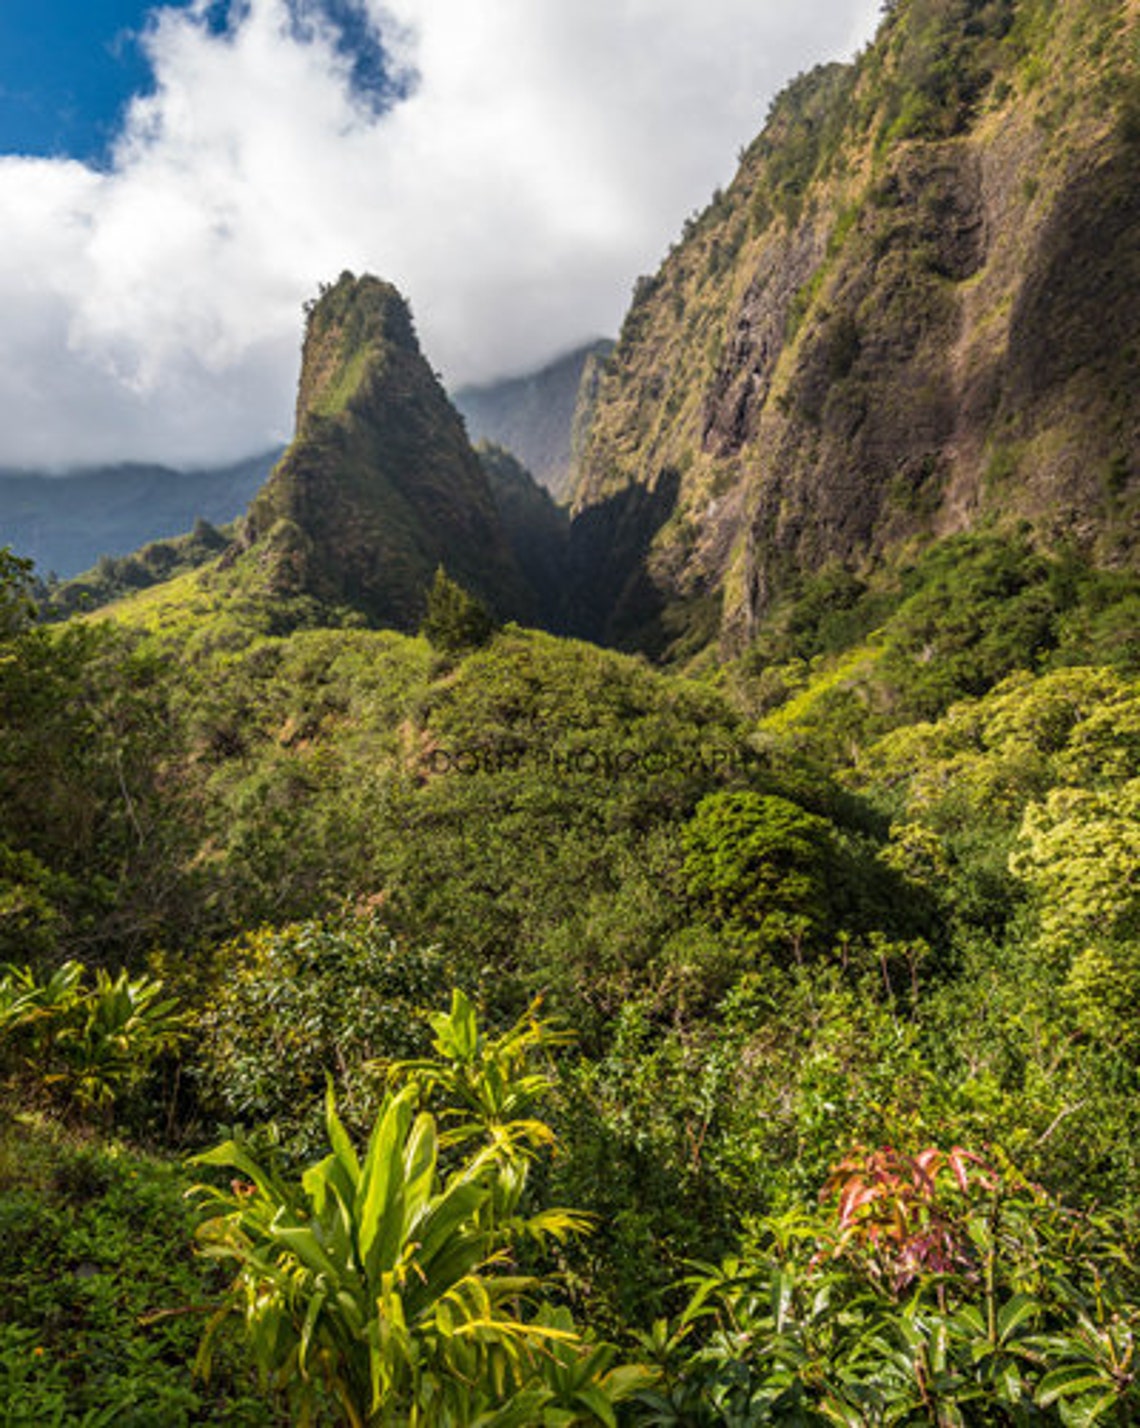 The Needle Maui Hawaii Iao Valley State Monument Landscape - Etsy